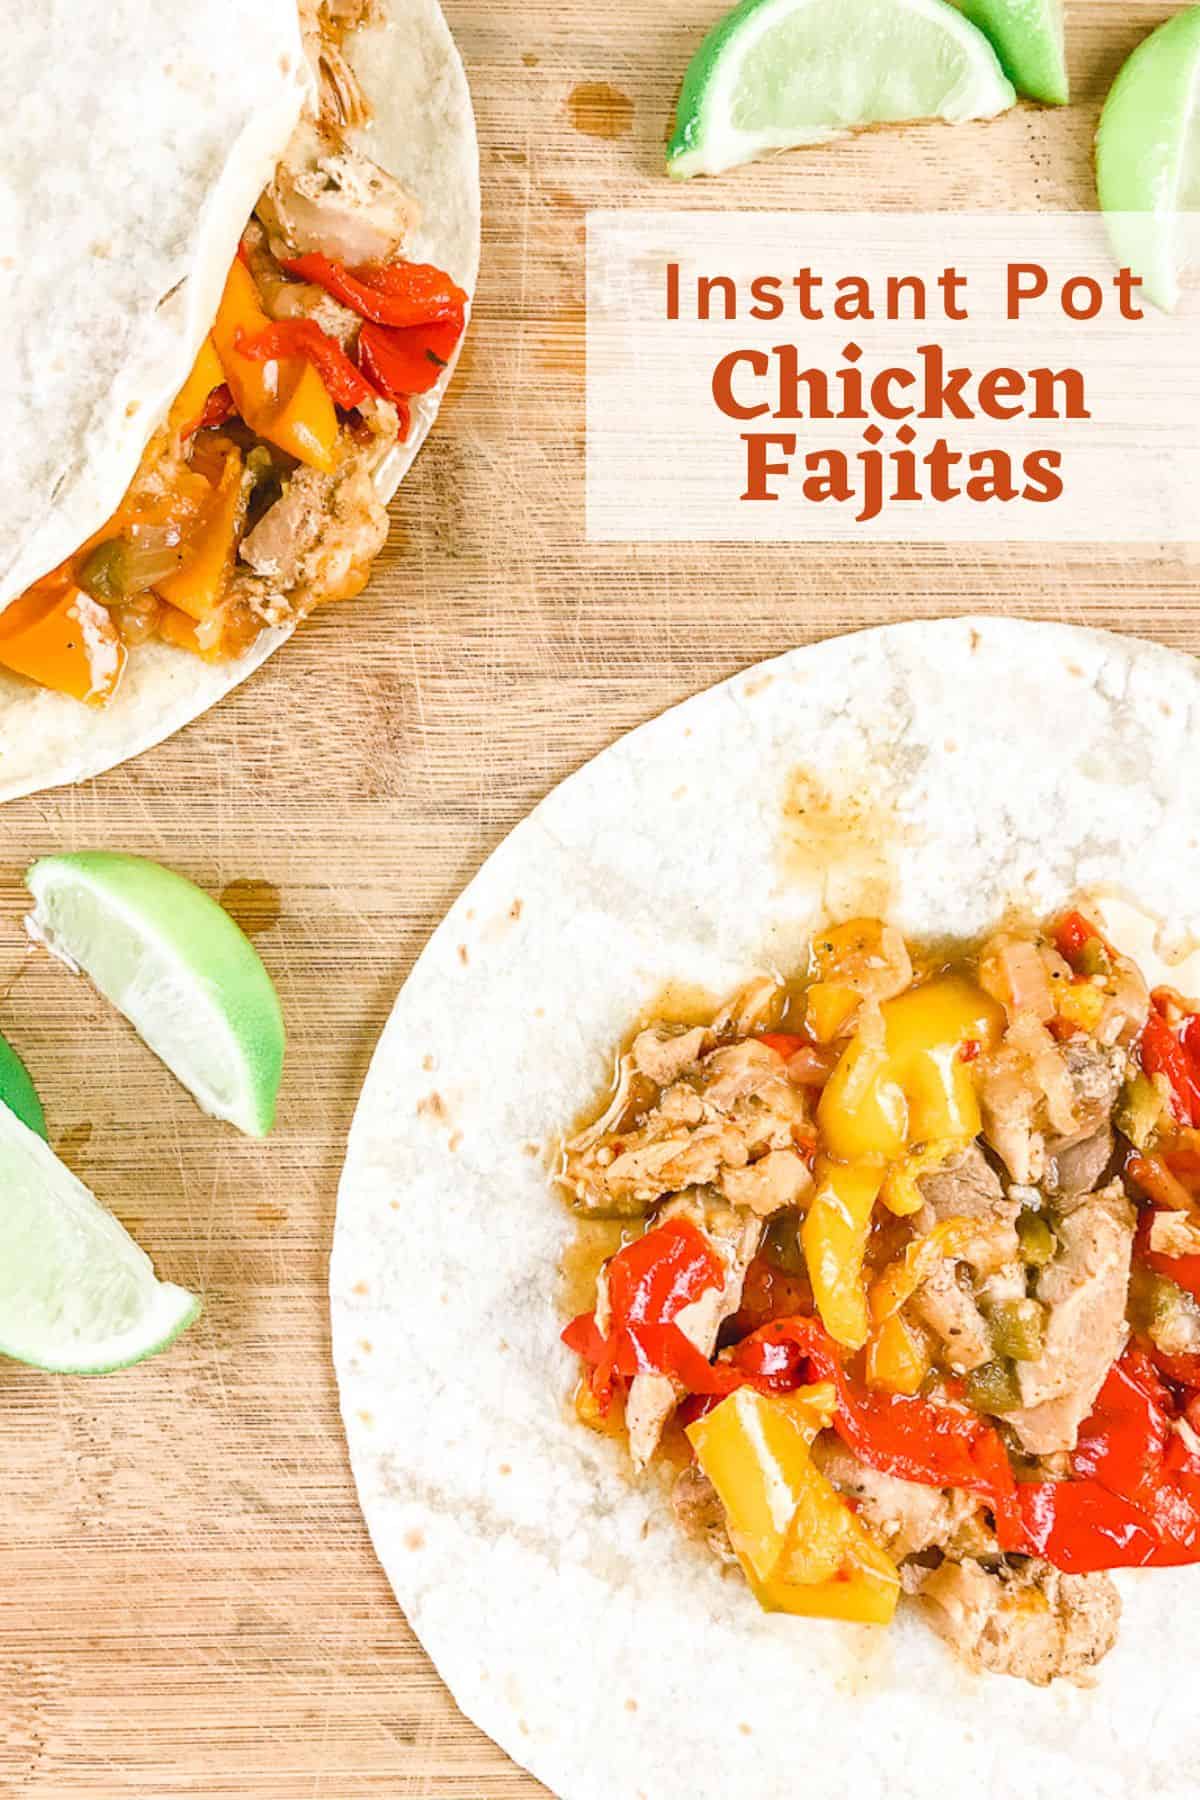 A wooden cutting board with two chicken fajitas and lime wedges.